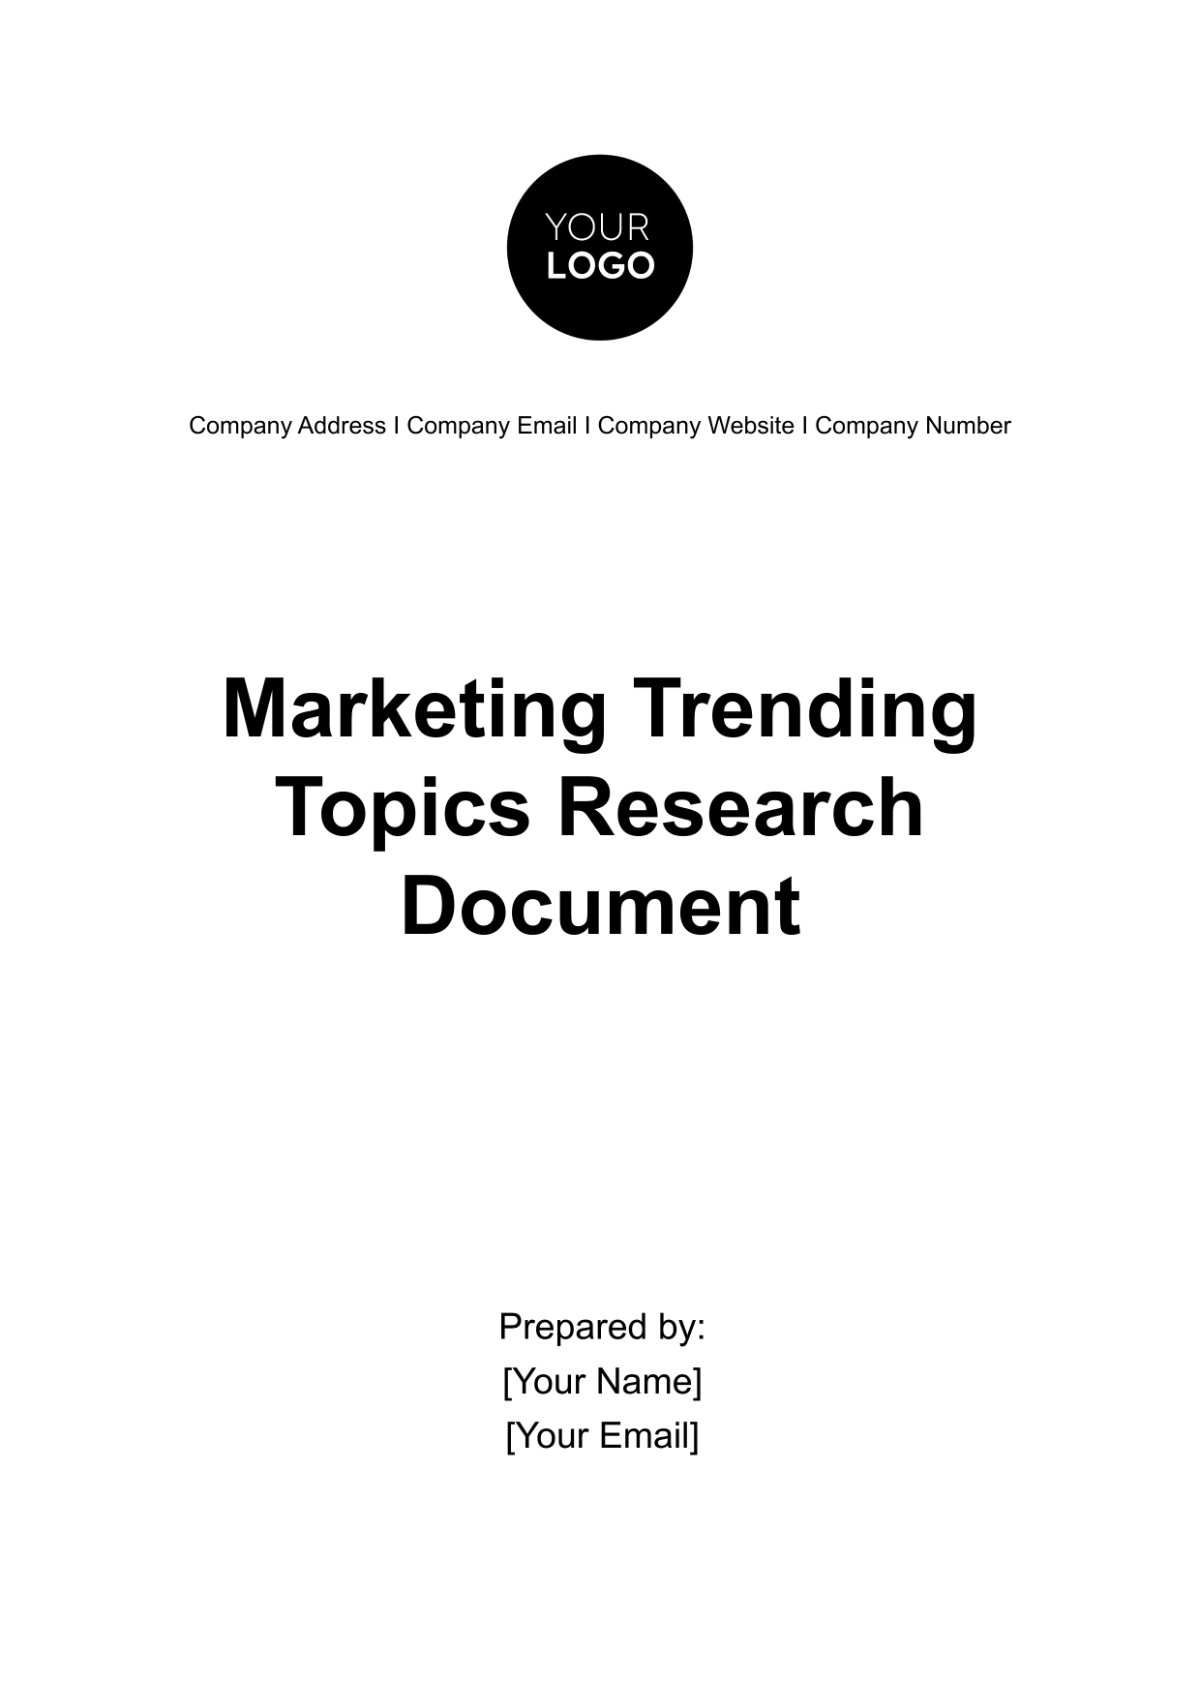 Free Marketing Trending Topics Research Document Template